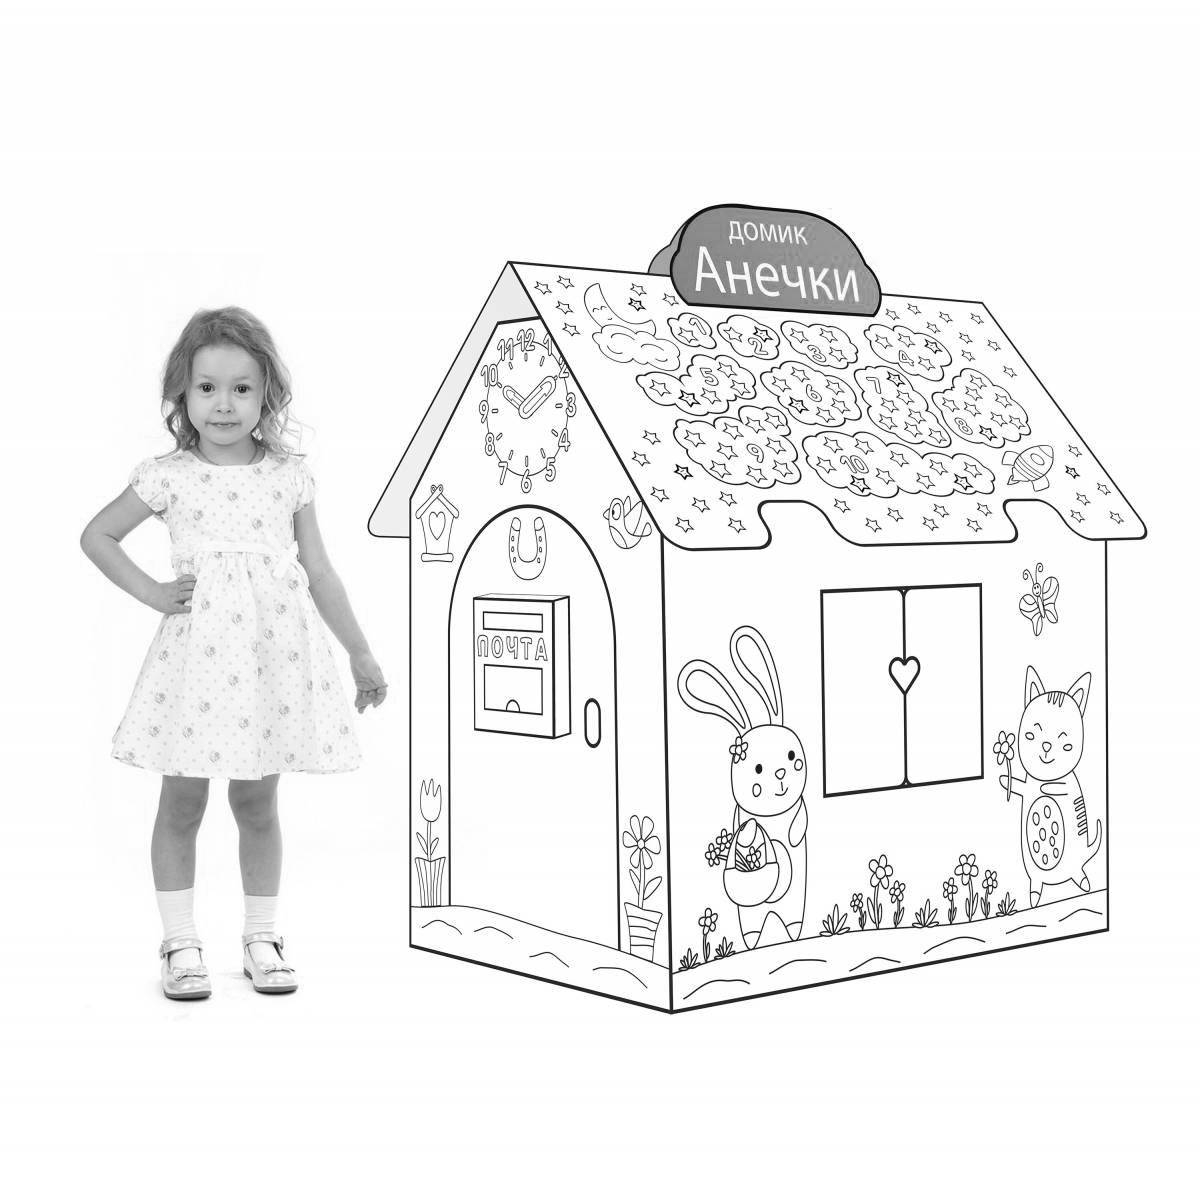 Splendid rich family house coloring book